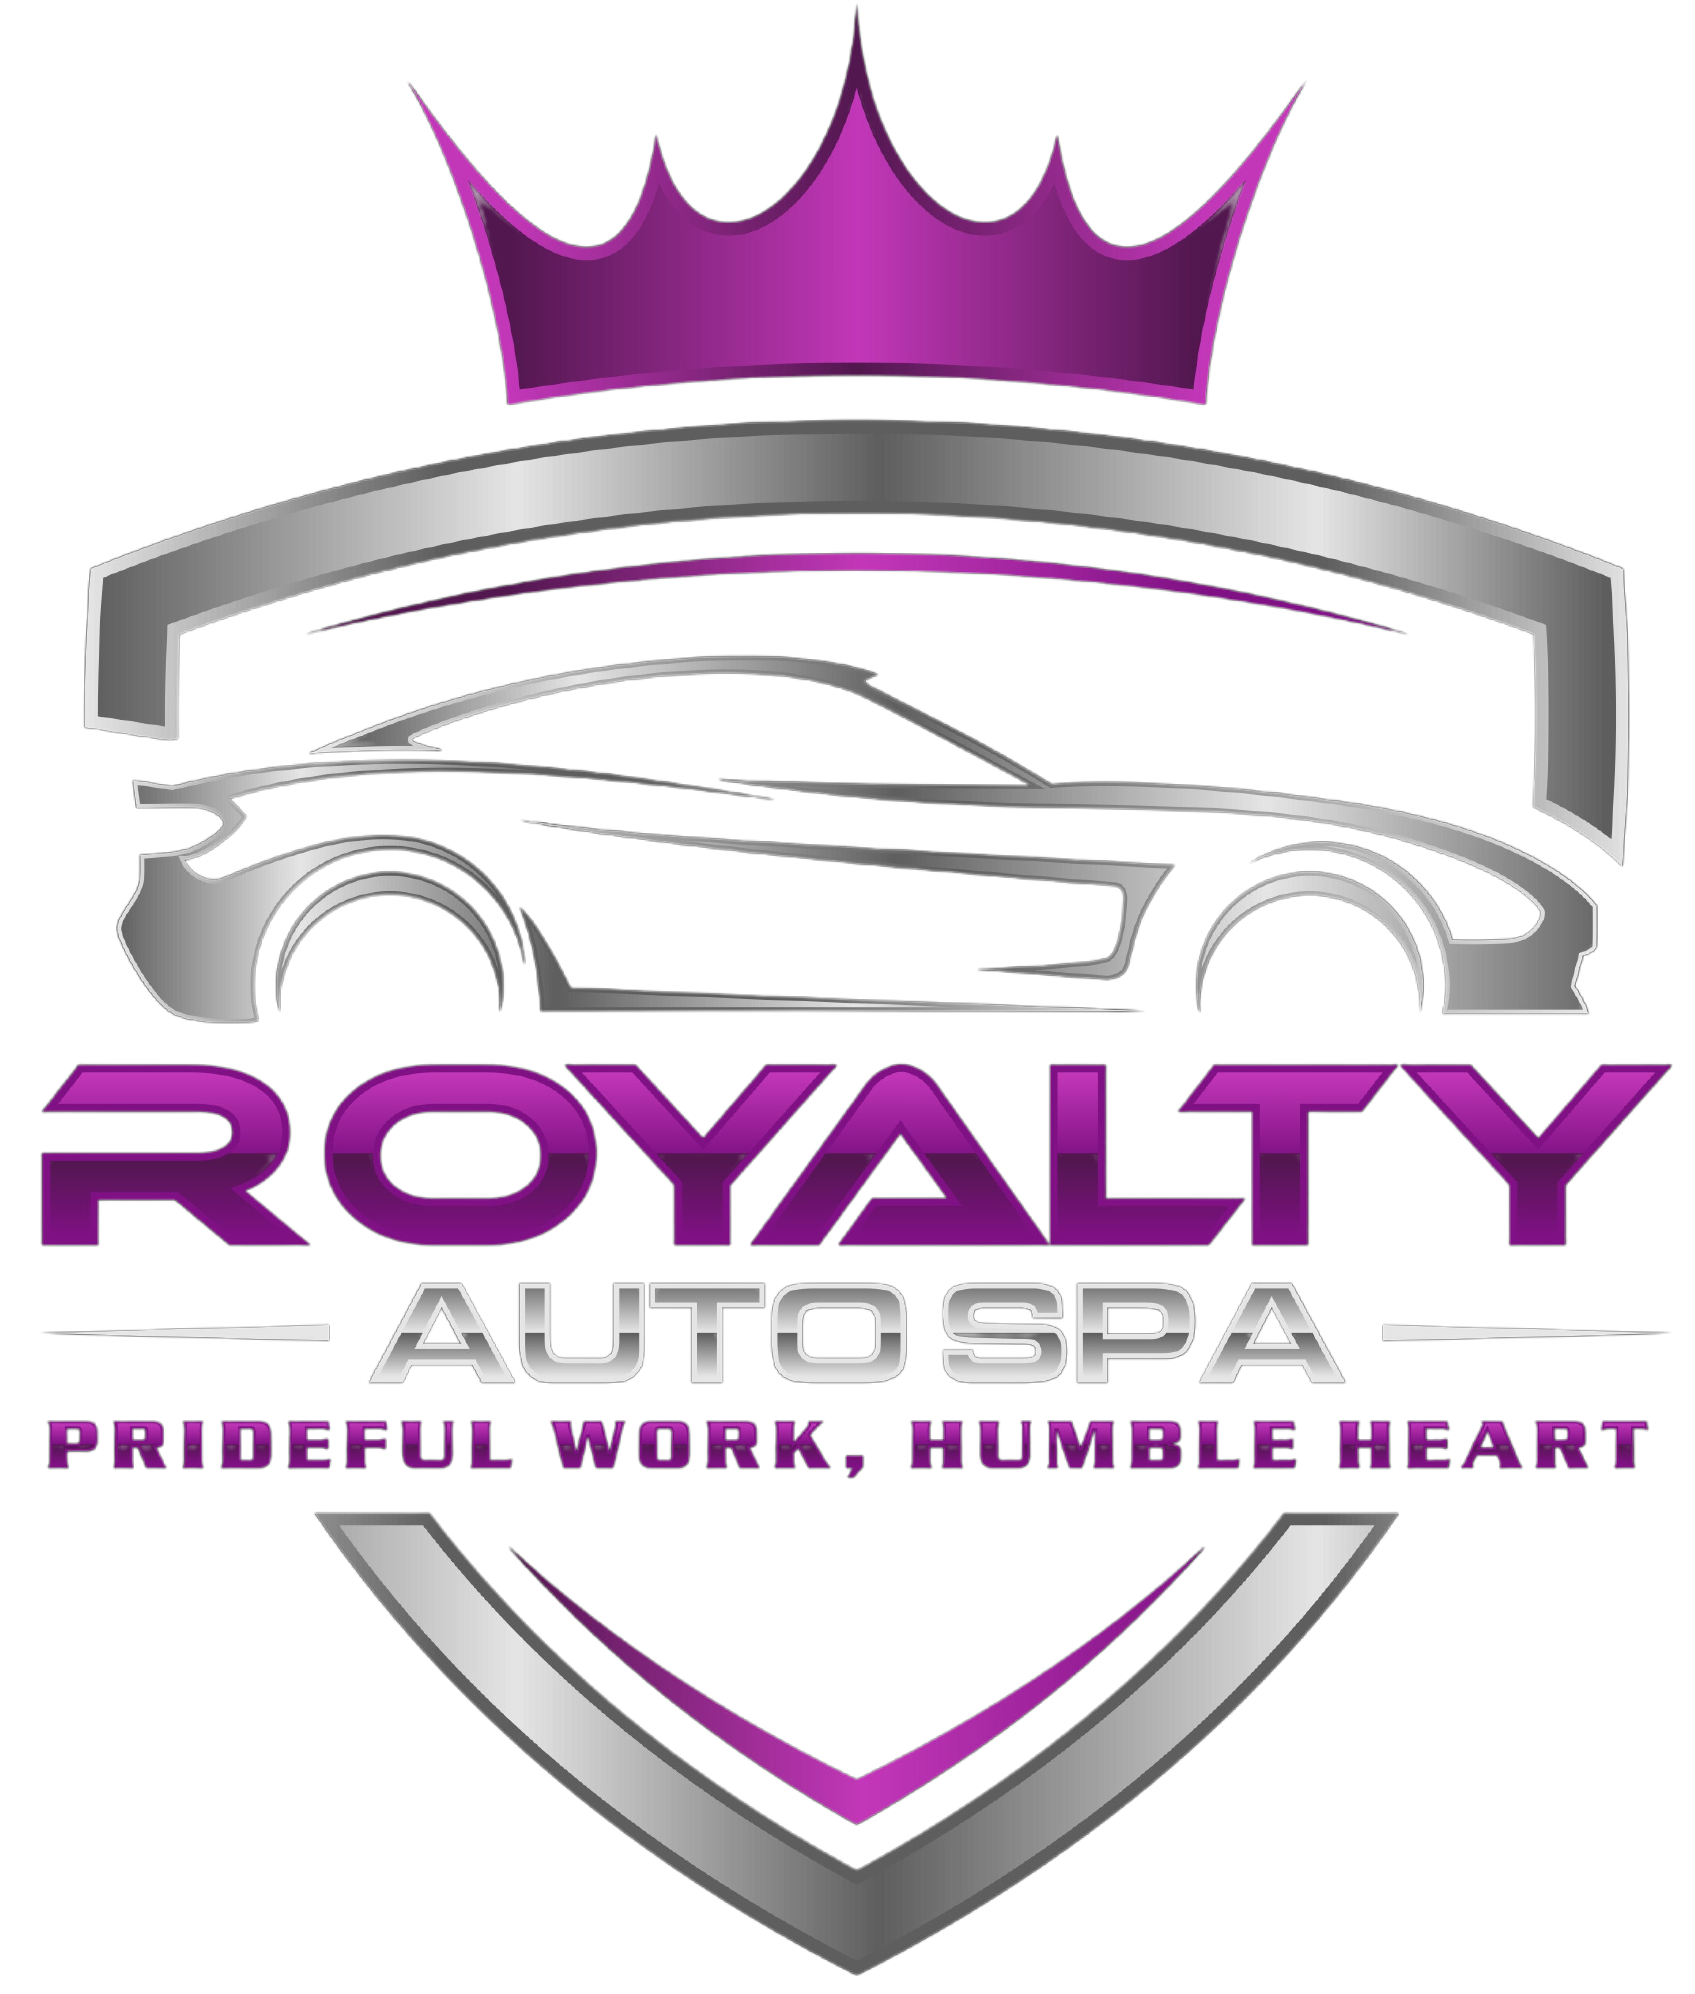 Royalty Auto Spa  Window Tinting, Paint Protection Film, Ceramic Coating, Auto  Detailing